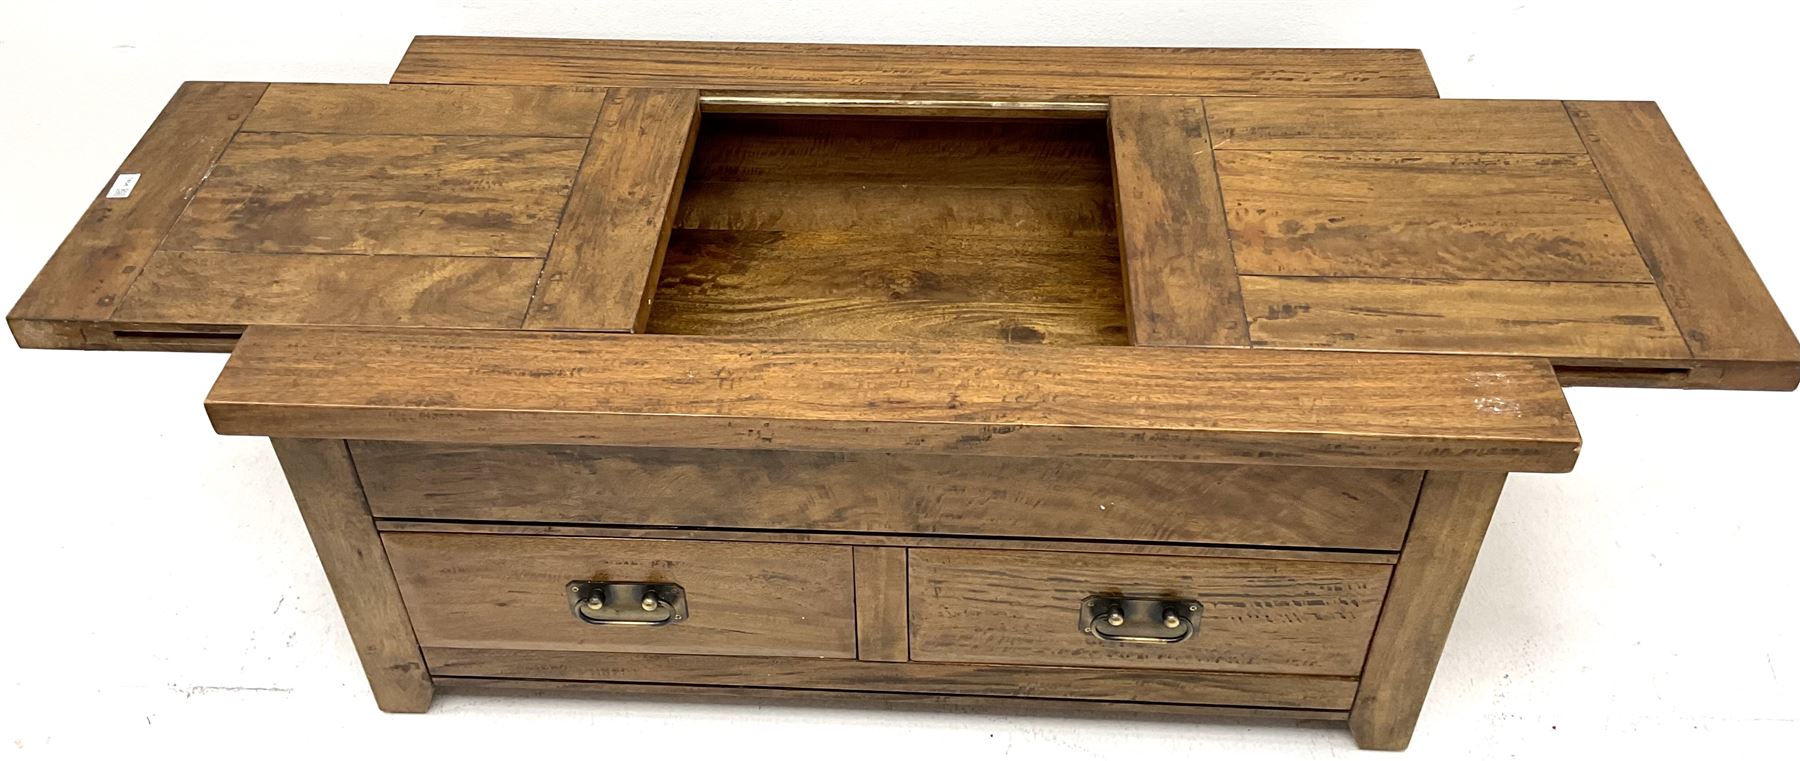 Barker & Stonehouse Frontier Range mango wood coffee table - Image 4 of 4